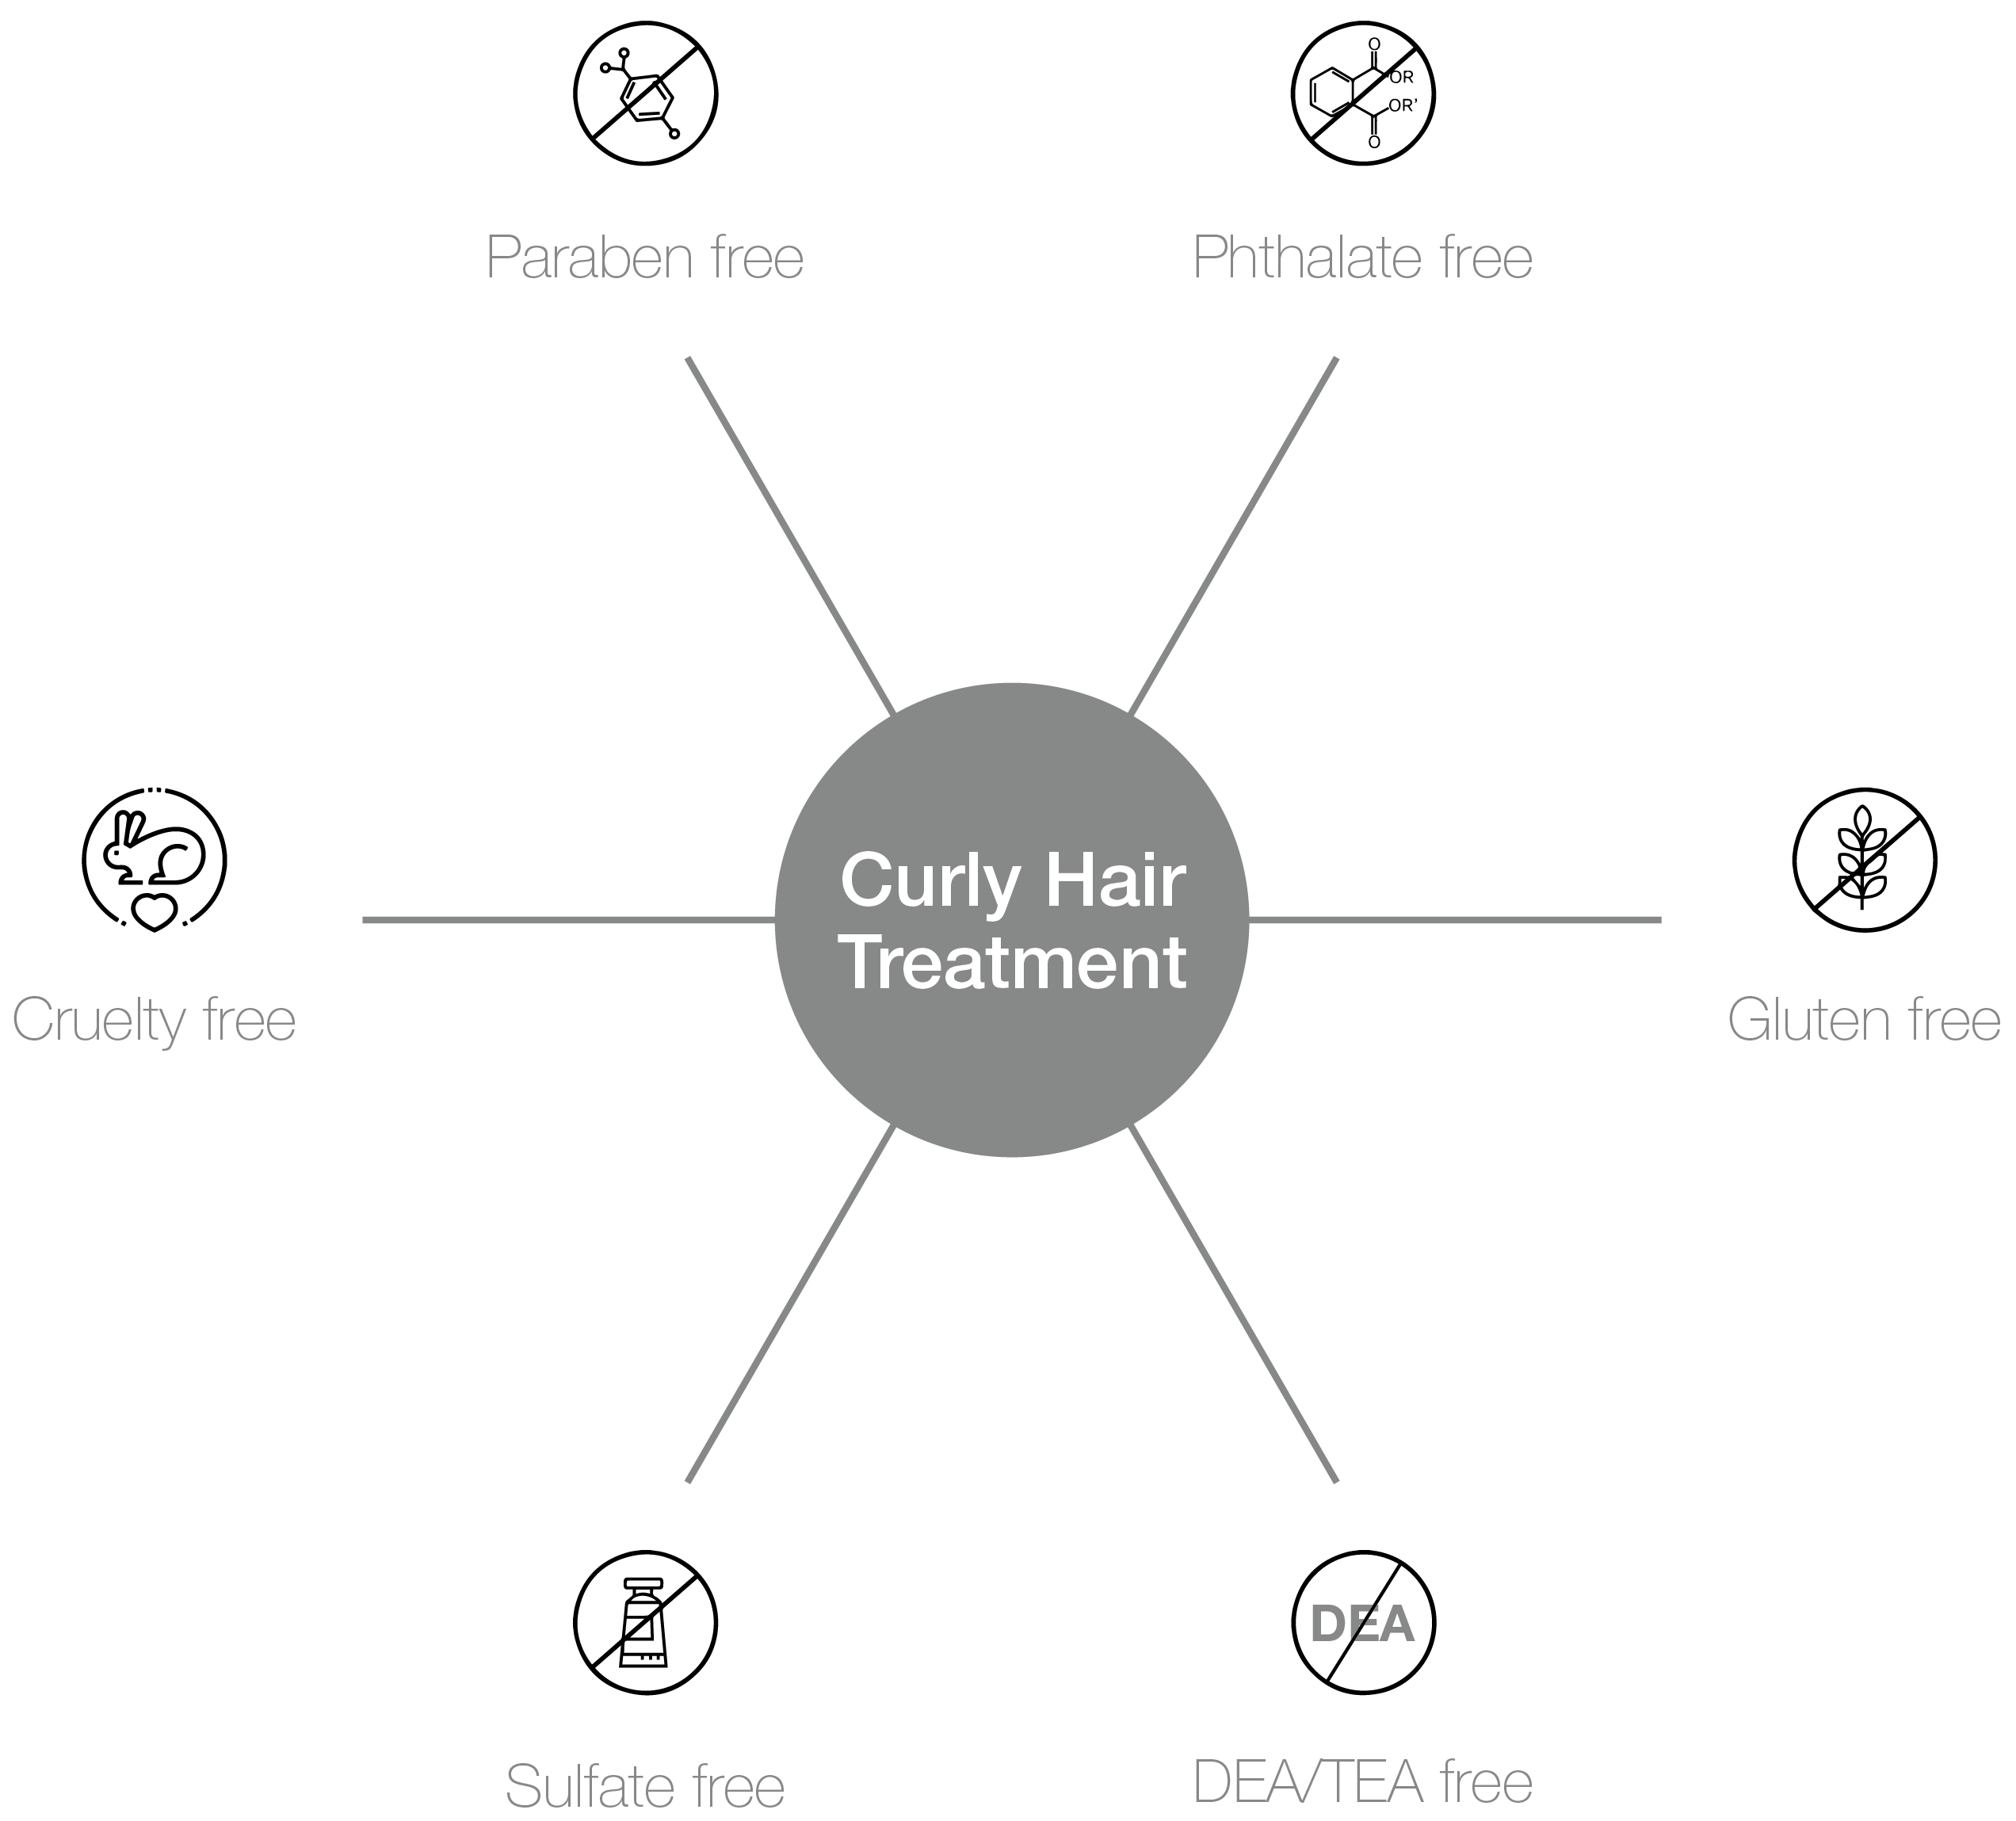 Curly Hair Treatment Pro-benefits